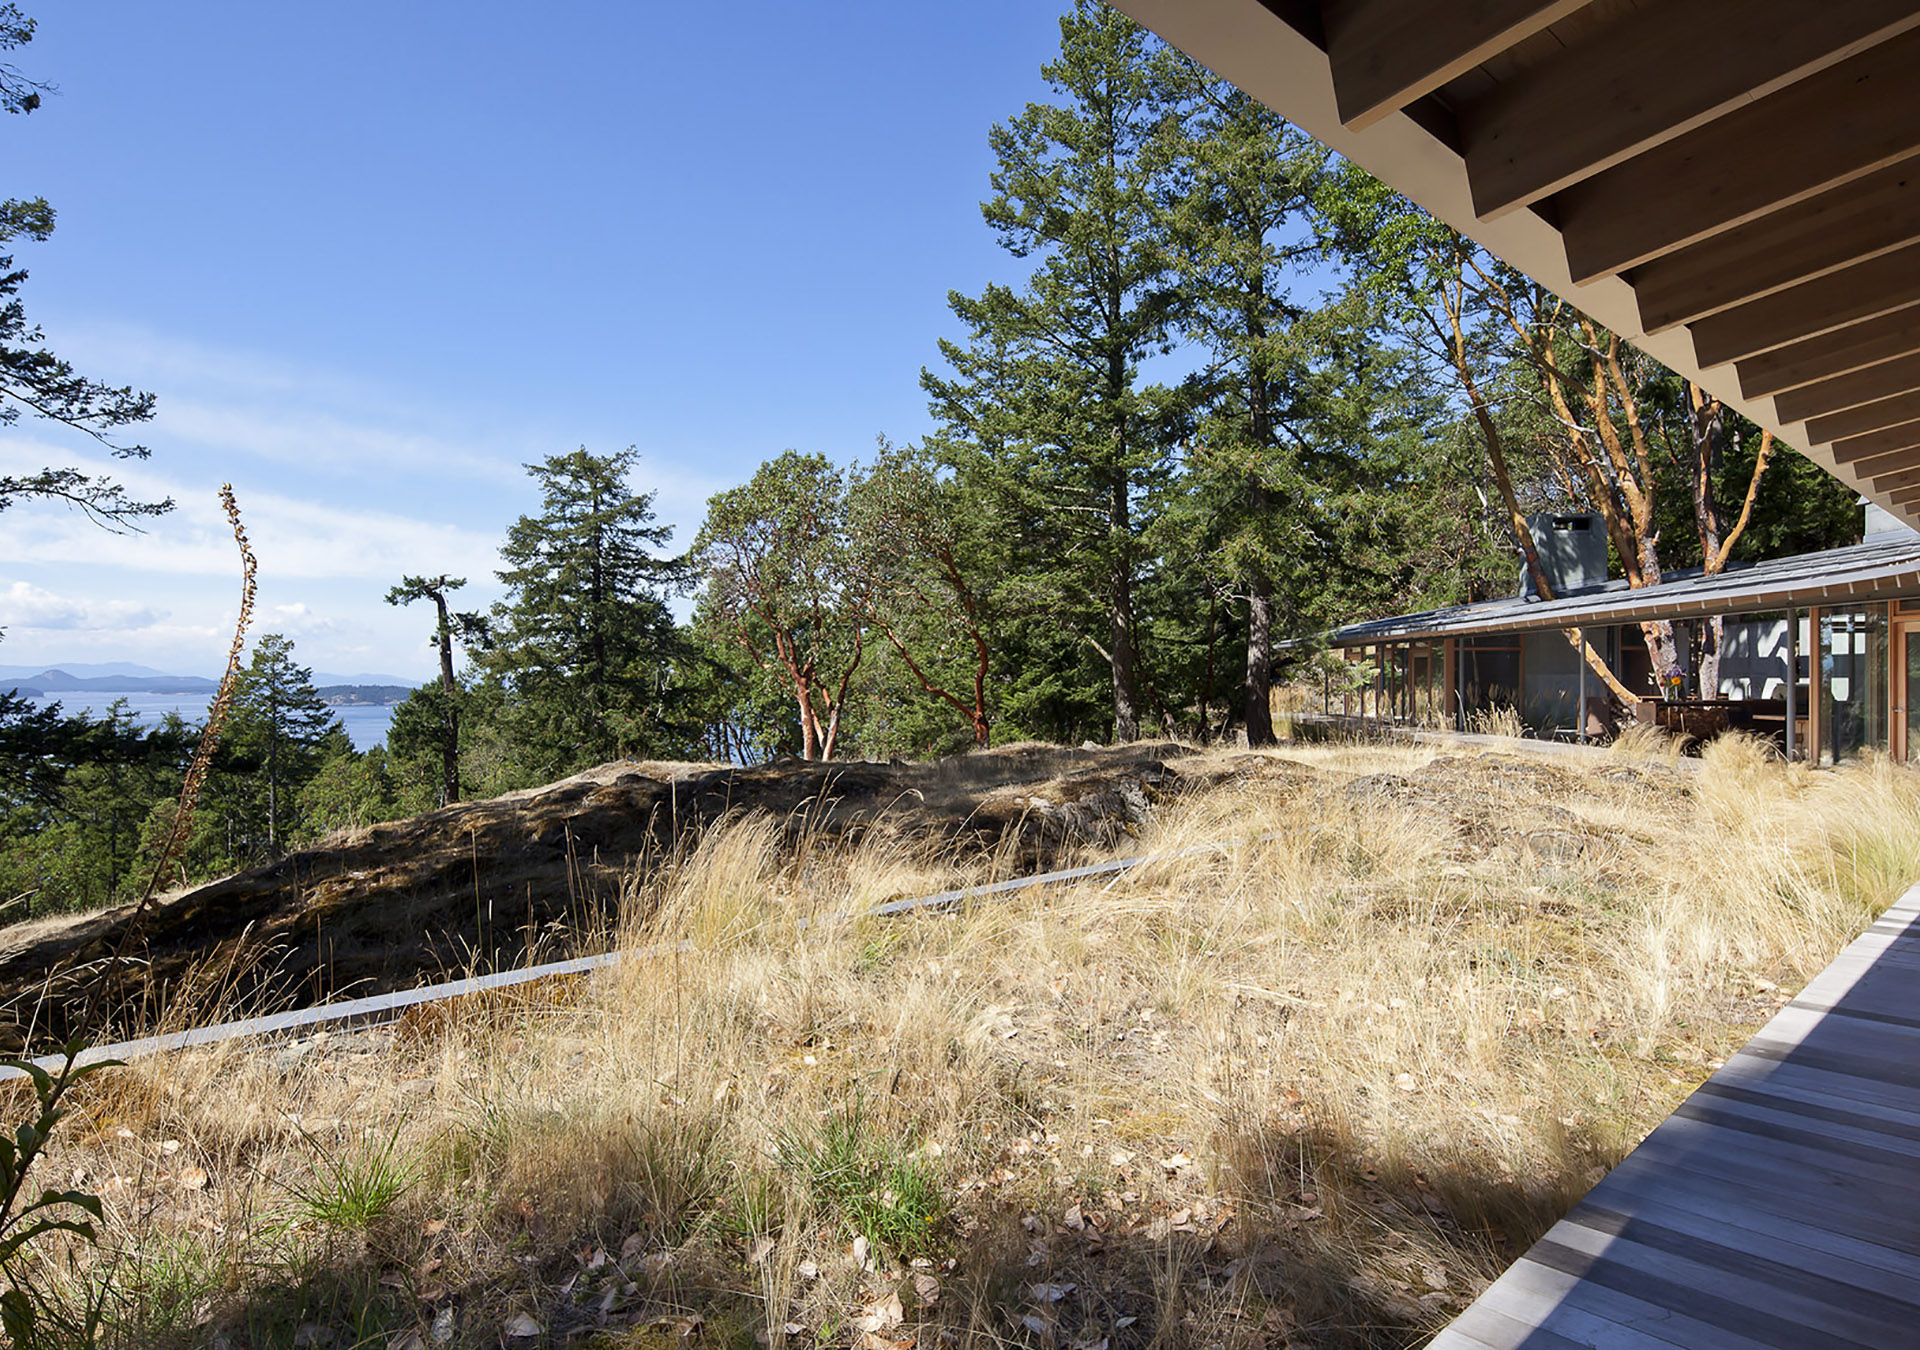 Spruce forest gives way to Suncrest Residence